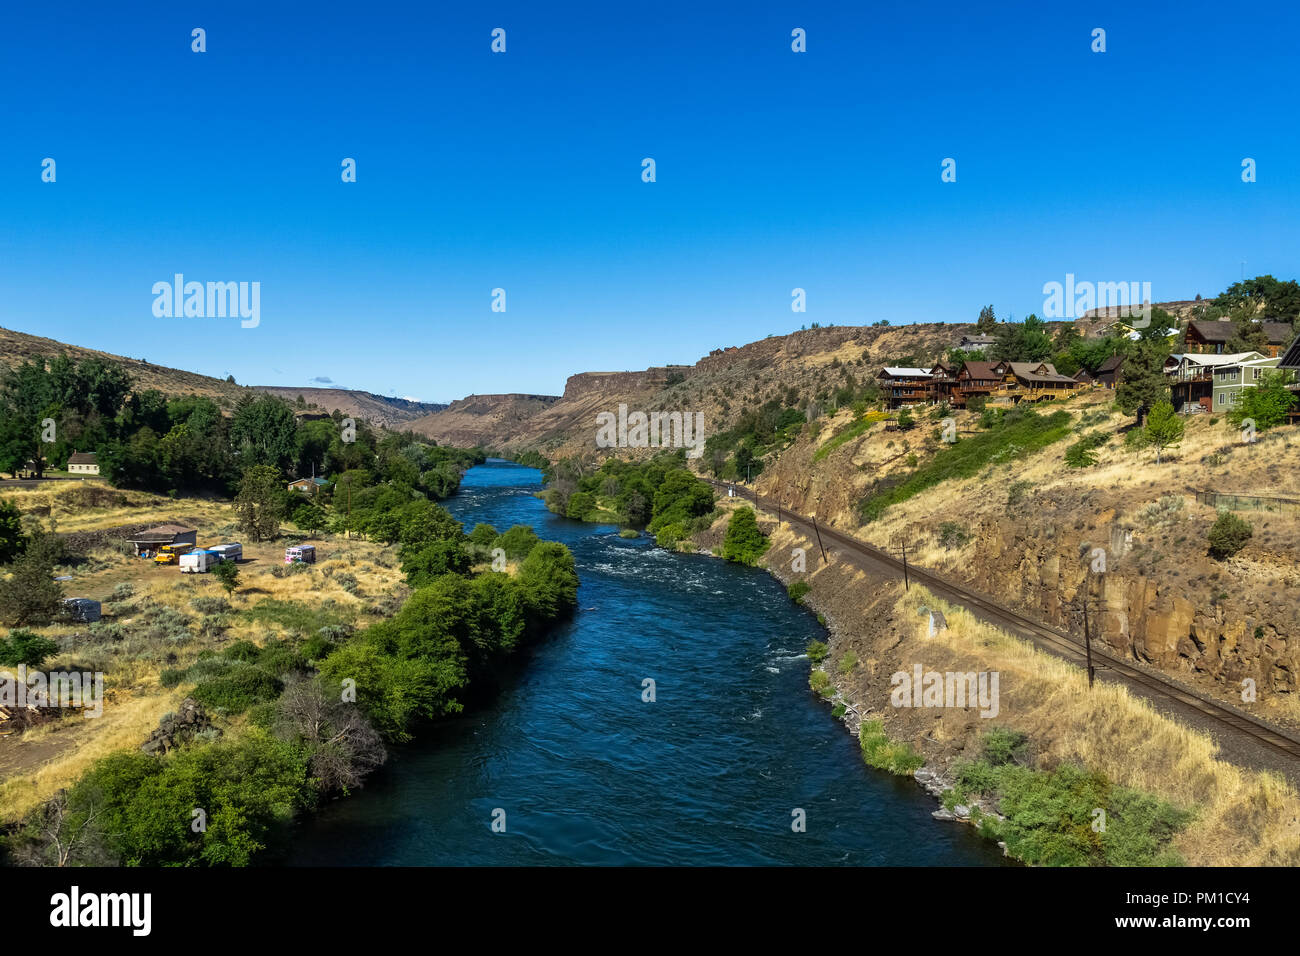 Deschutes River landscape in Maupin on a beautiful morning and sunny day, Deschutes Canyon, Wasco county, Central Oregon, USA. Stock Photo